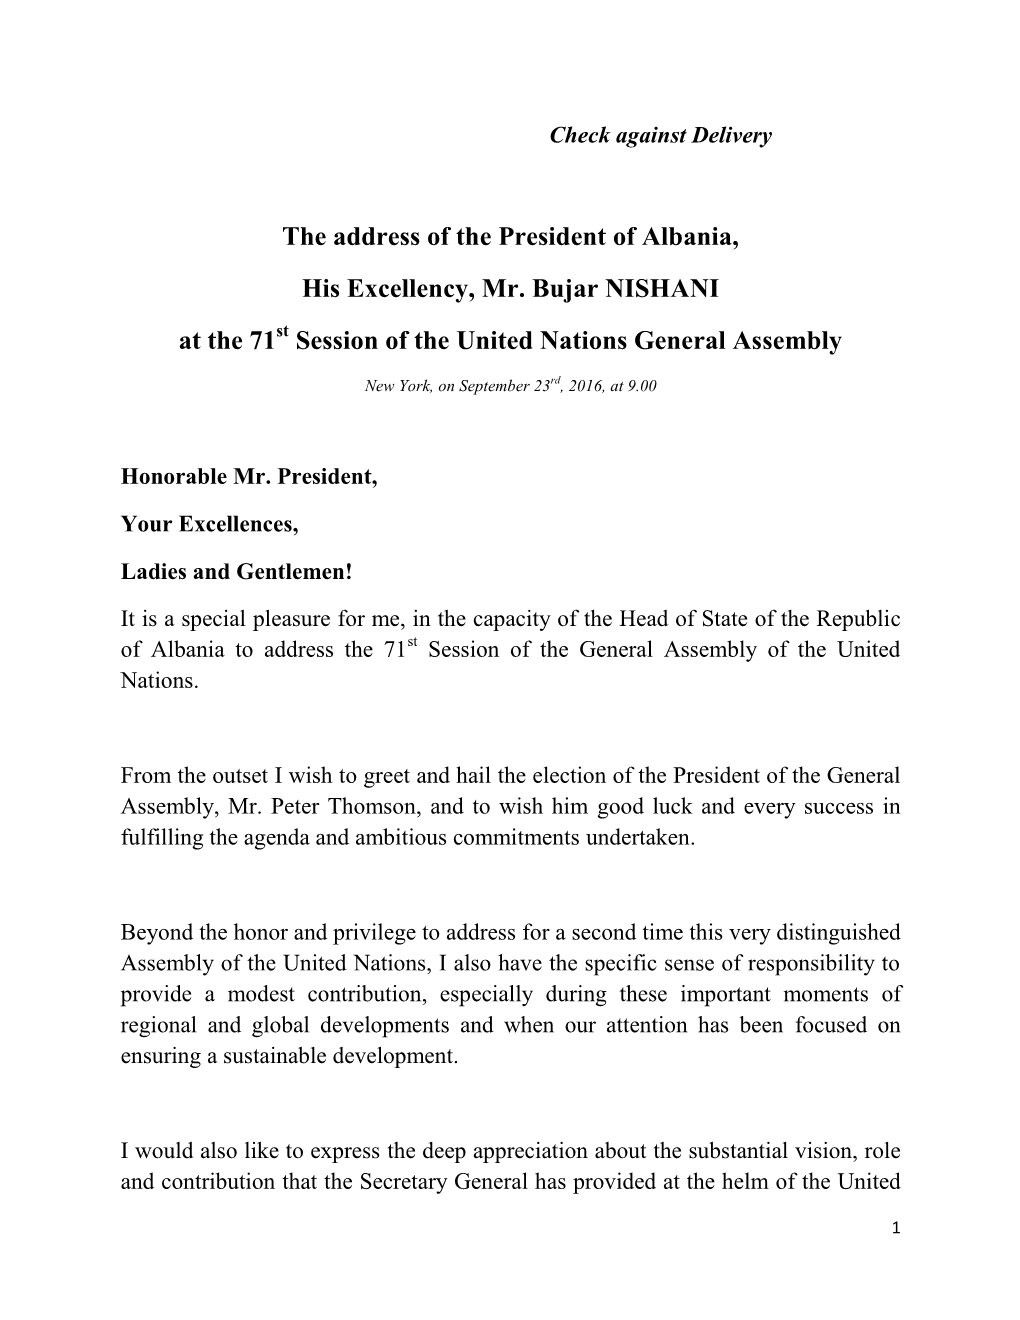 The Address of the President of Albania, His Excellency, Mr. Bujar NISHANI at the 71St Session of the United Nations General Assembly